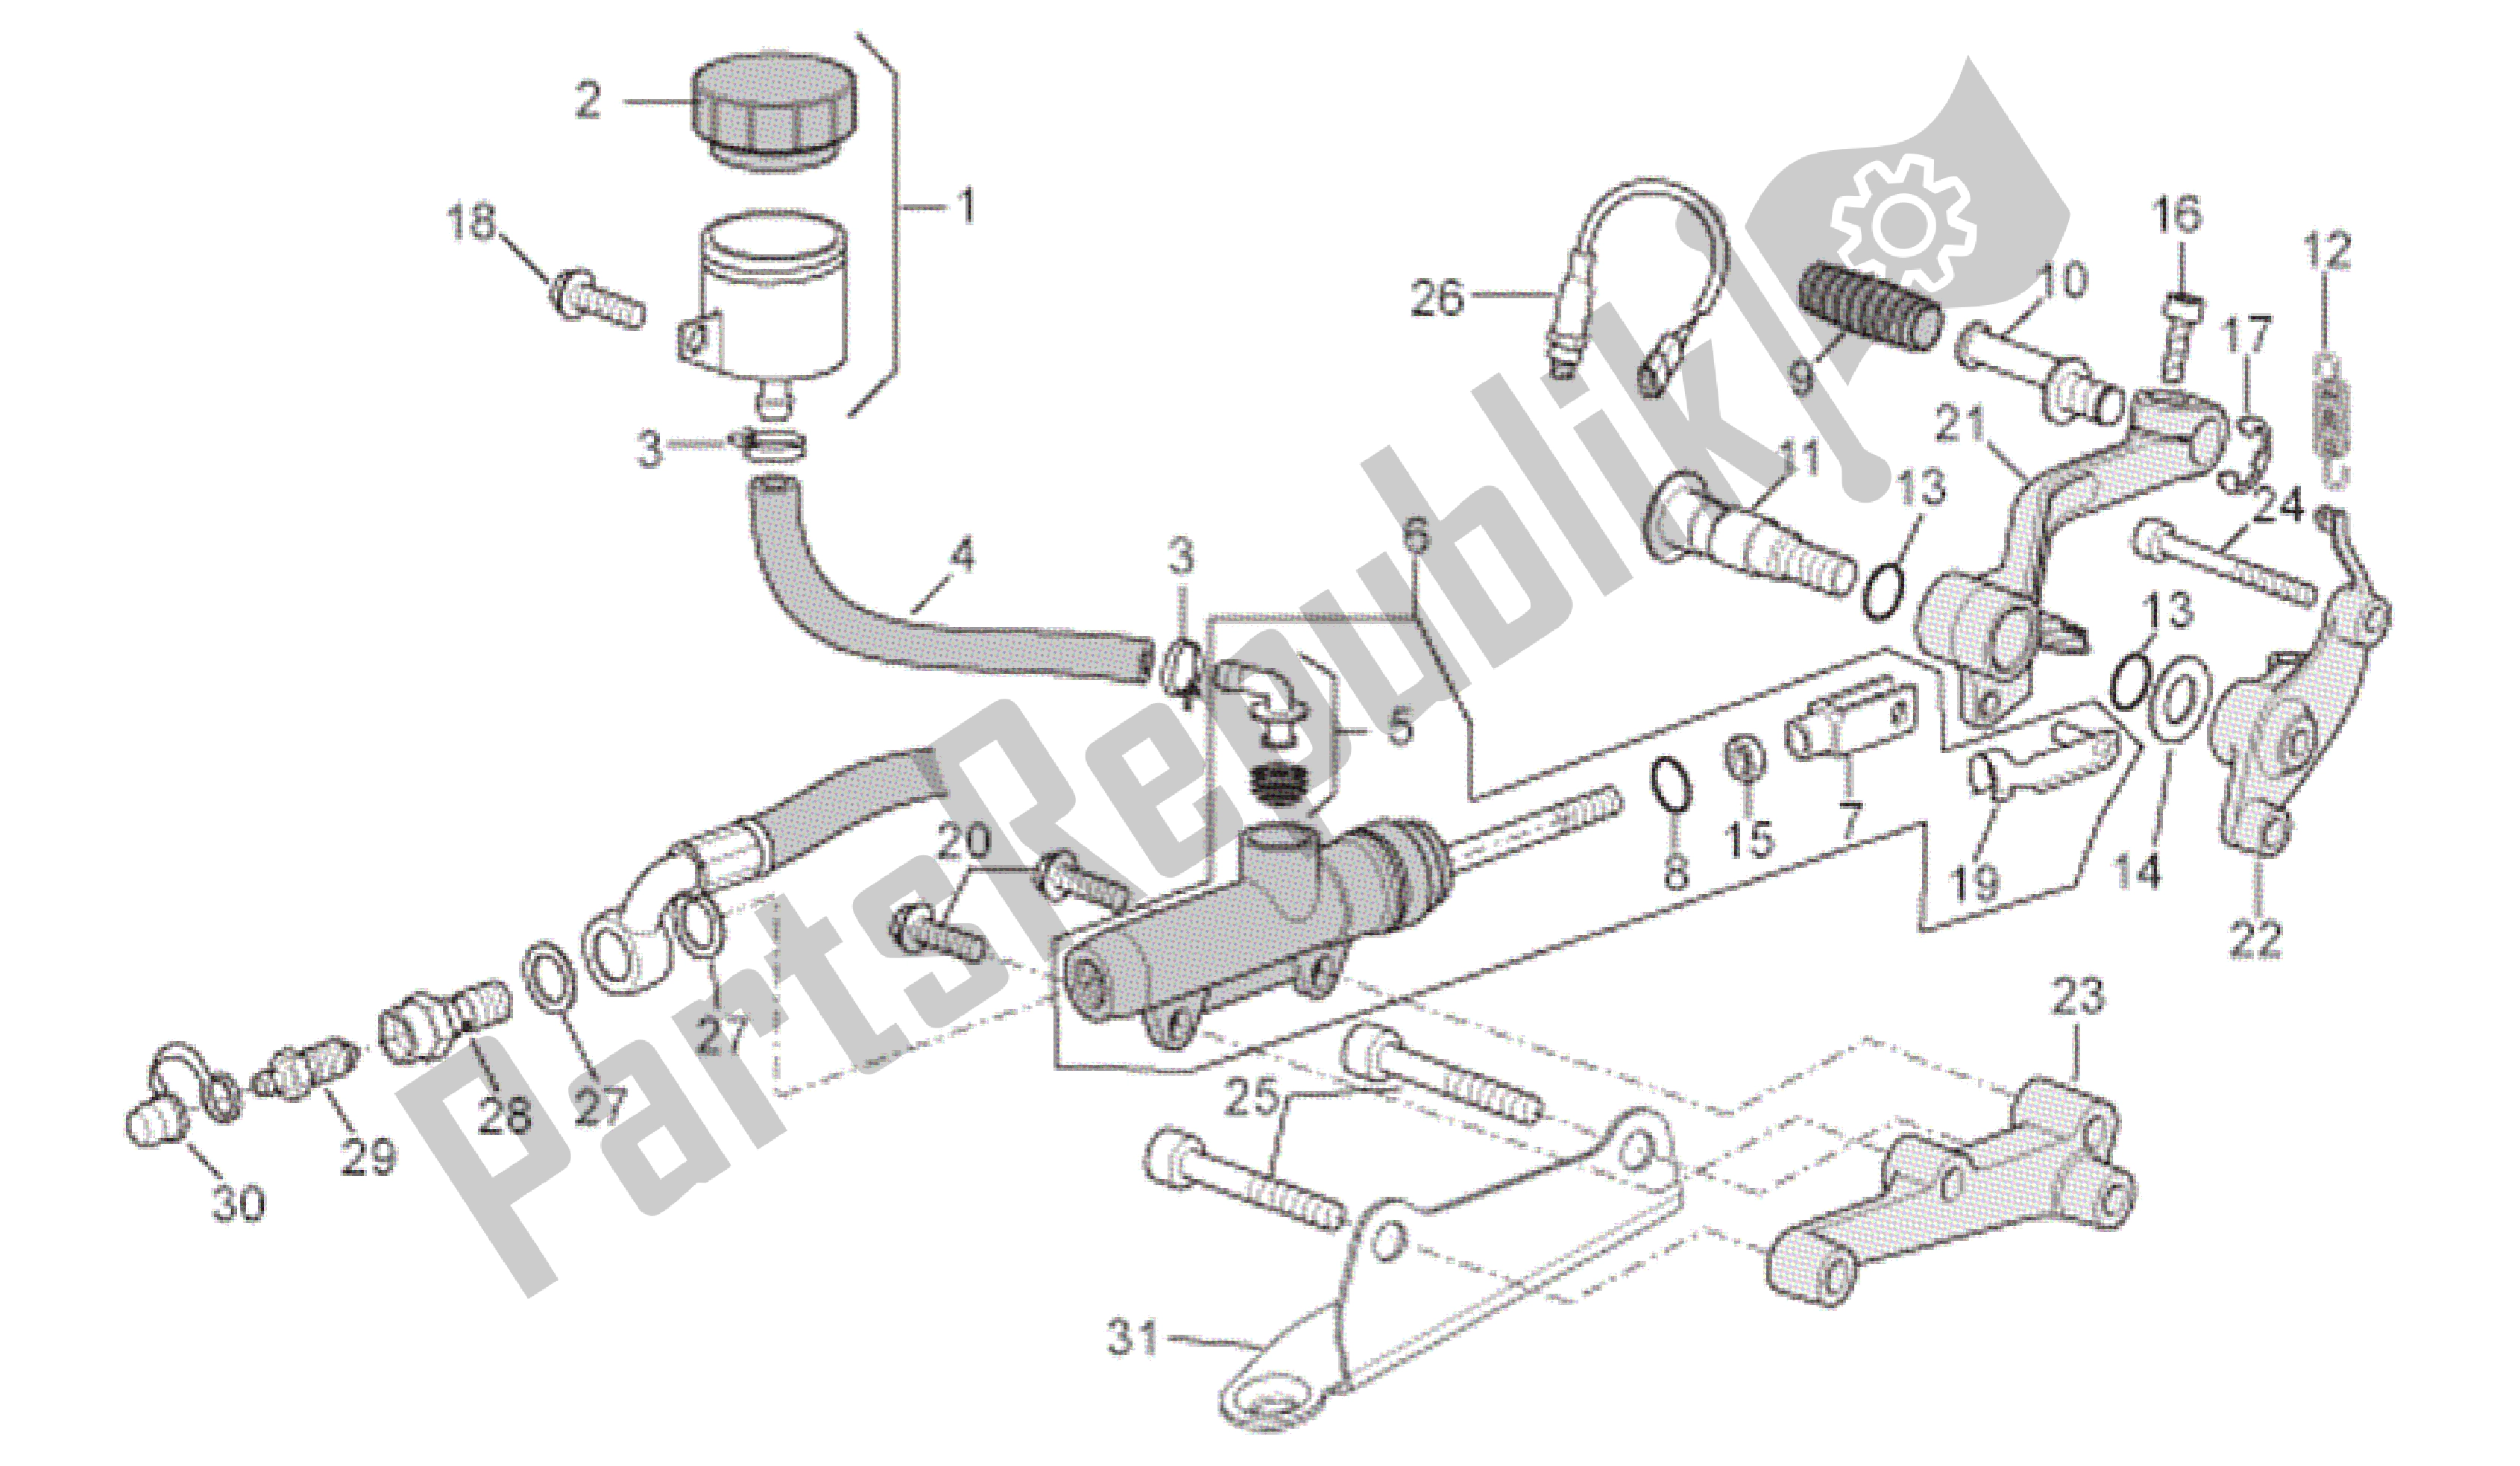 All parts for the Rear Master Cylinder of the Aprilia RSV Tuono R 3985 1000 2006 - 2009